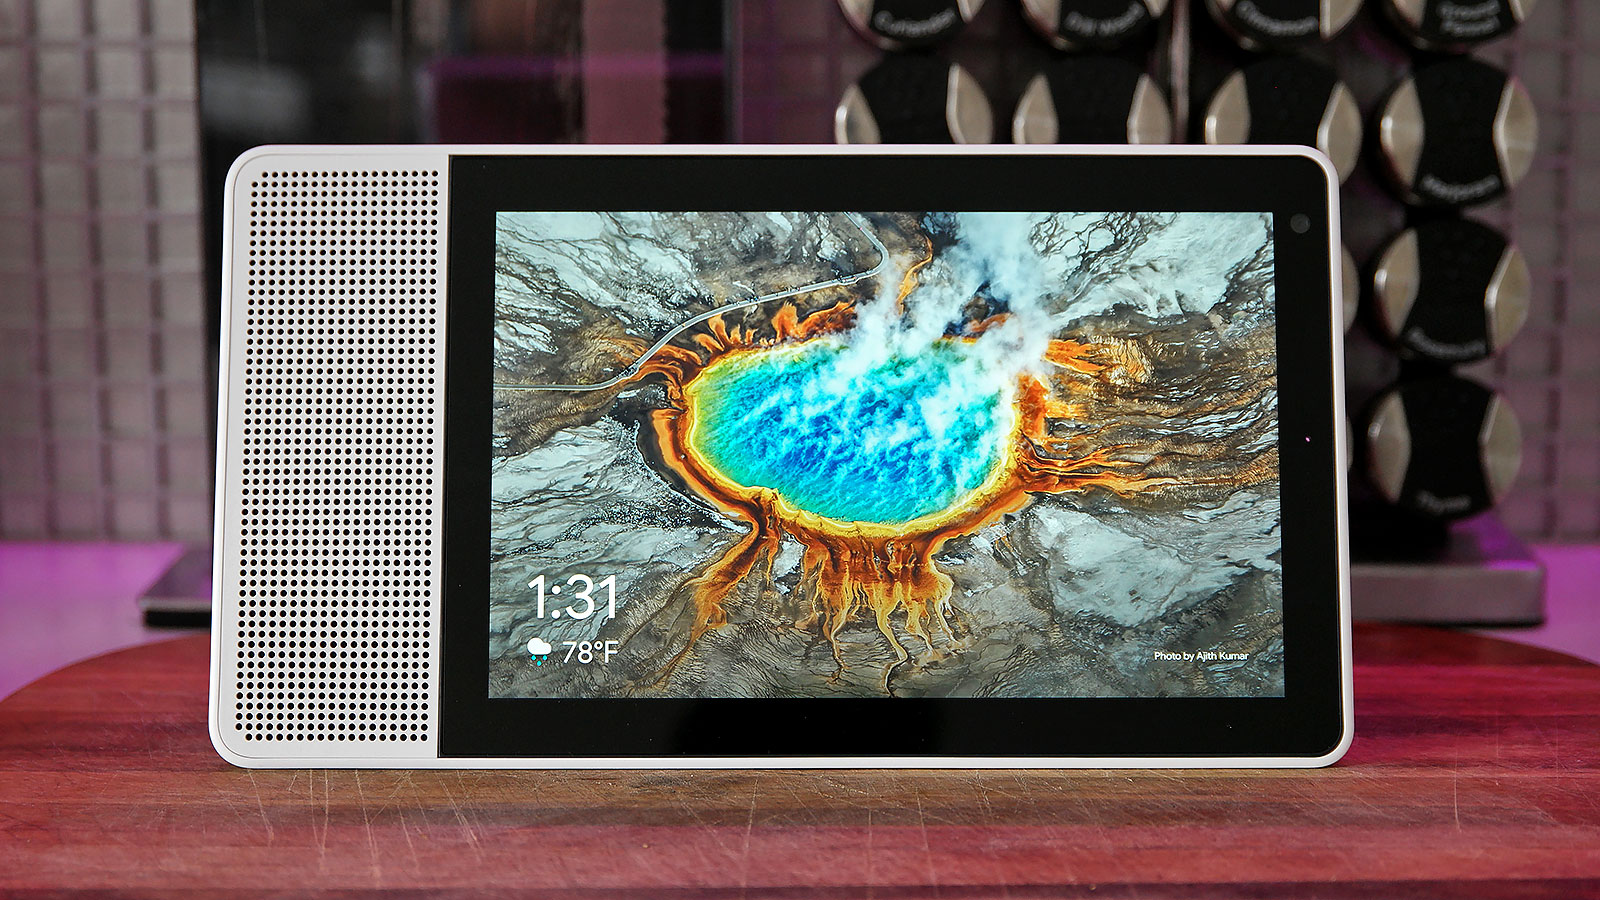 Google And Lenovo’s Smart Display Trounces Amazon’s In Every Way